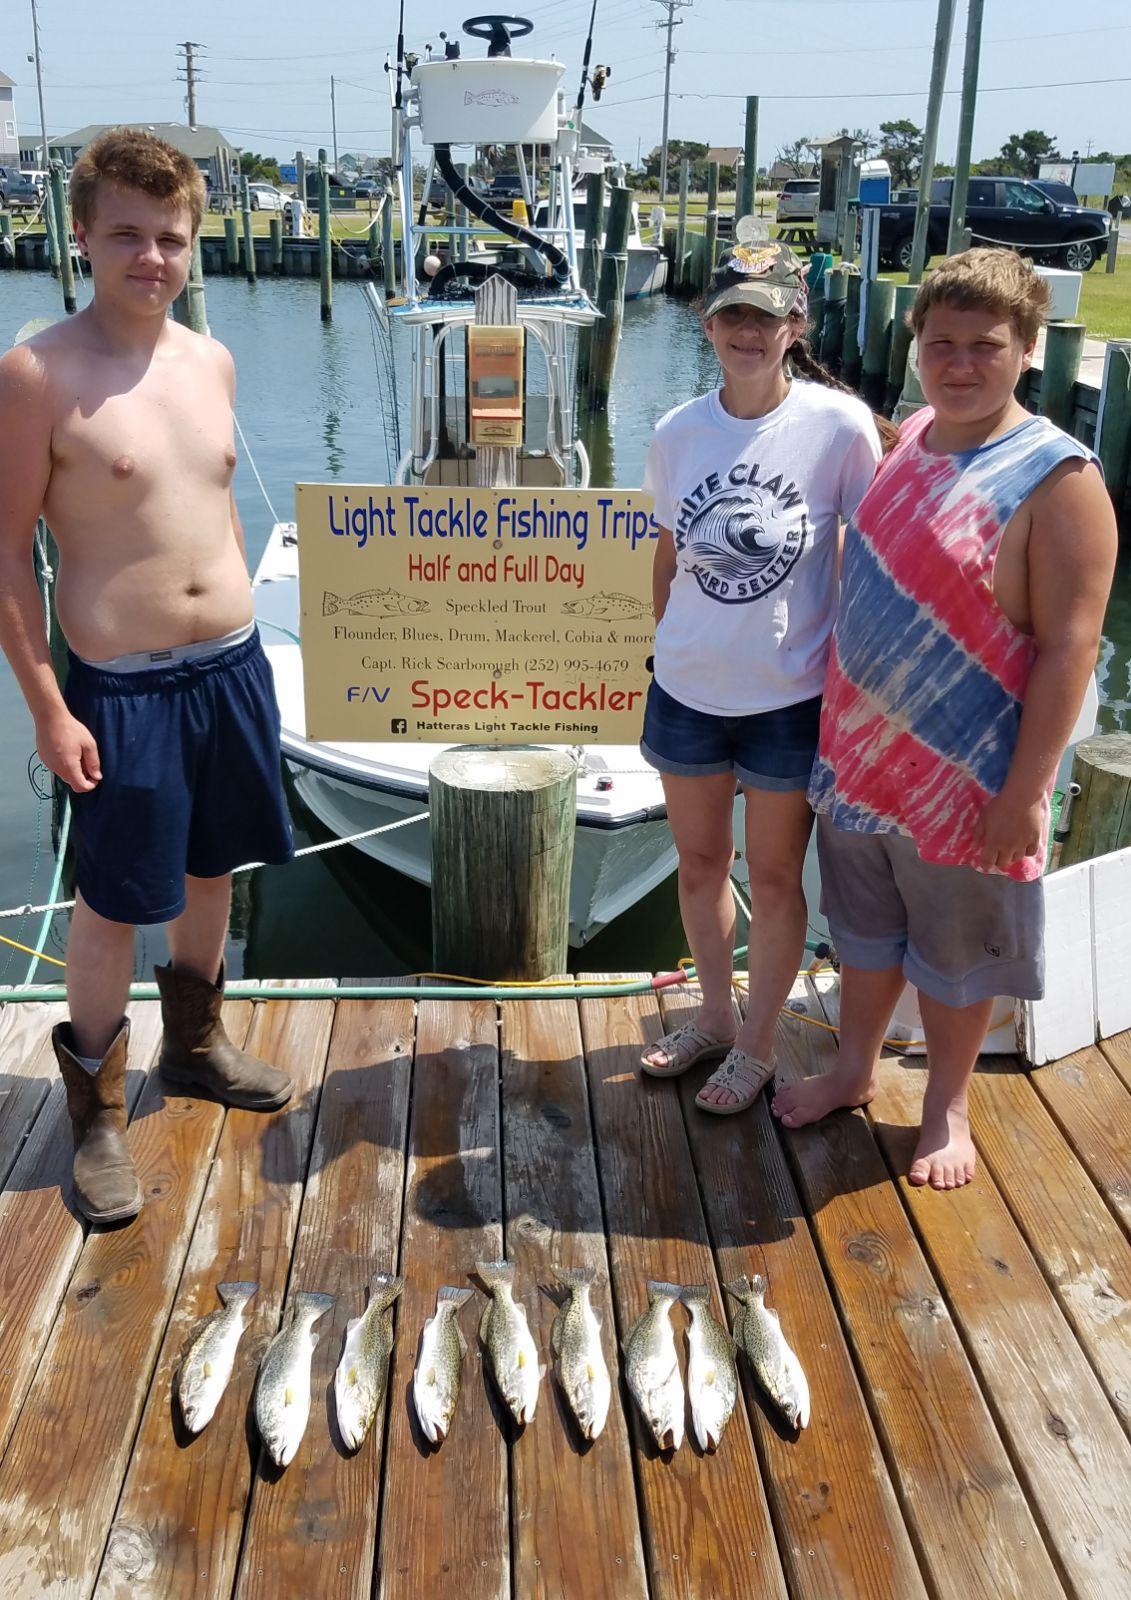 Speck-Tackler Fishing Teach's Lair Hatteras Inshore Charters Teach's Lair Marina